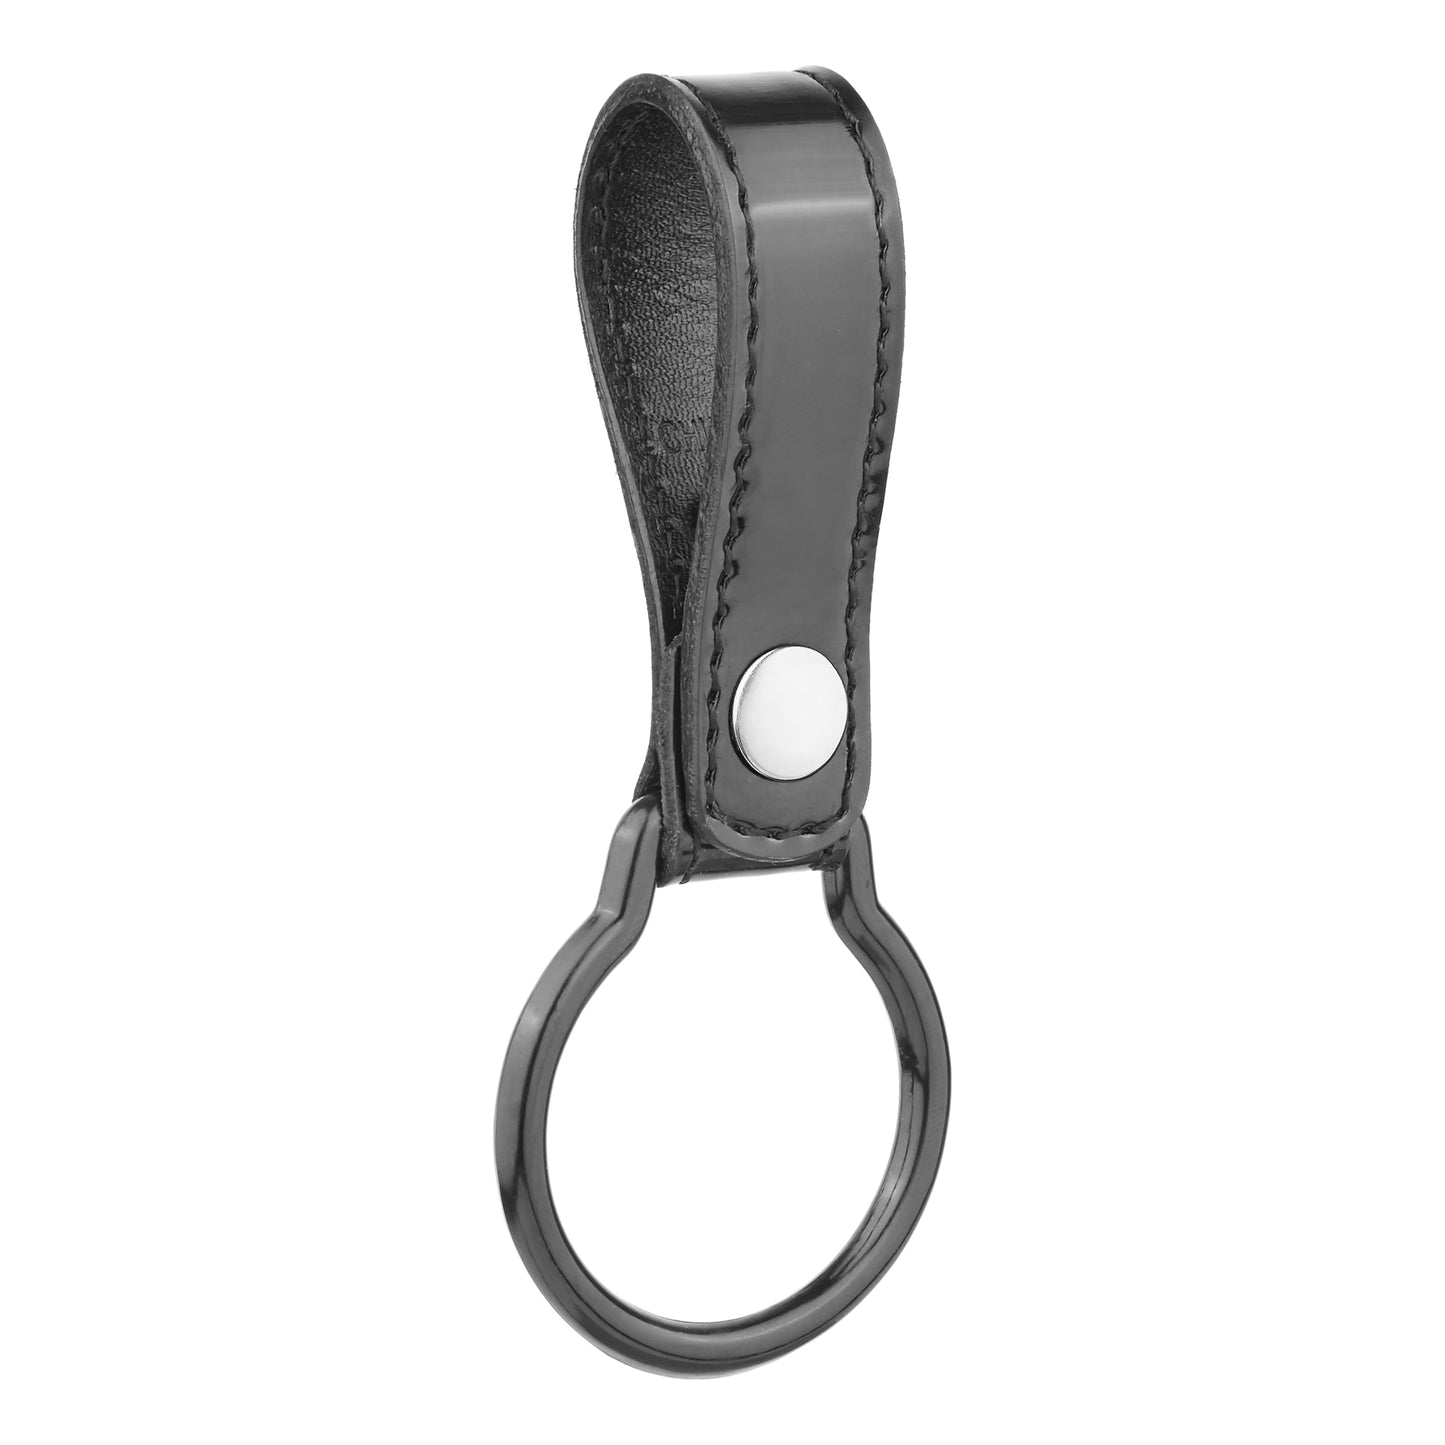 Clarino Leather D Cell Flashlight Strap